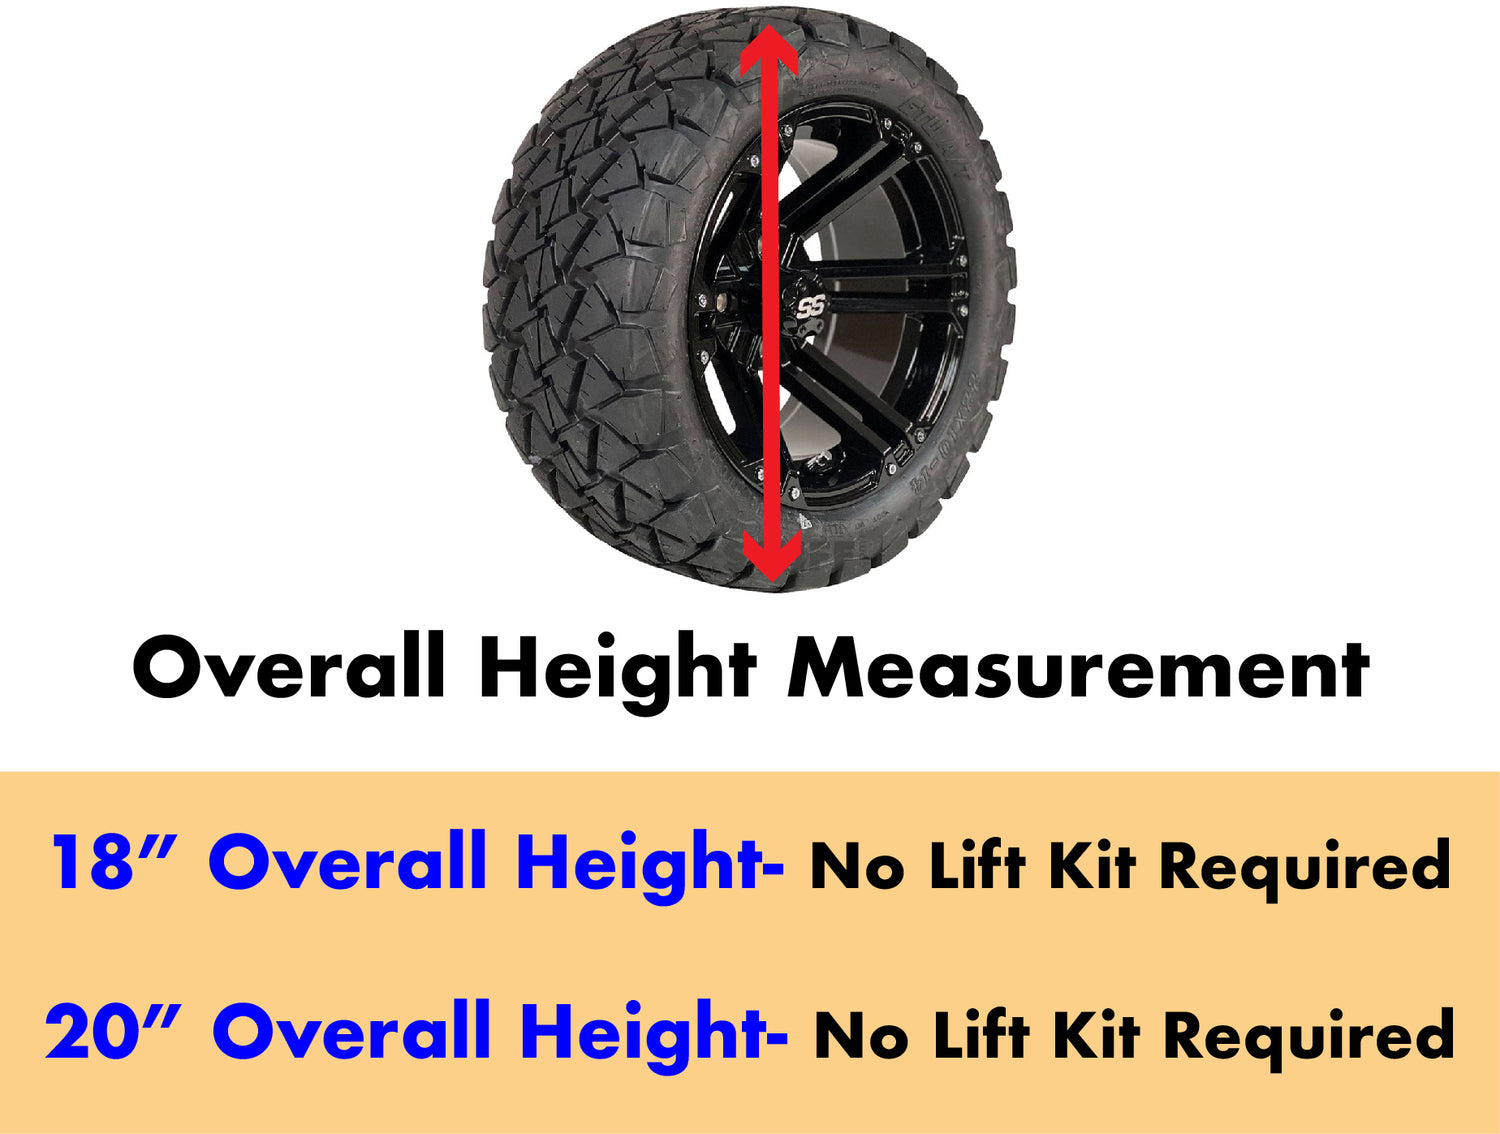 Non-Lifted EZGO golf cart wheel and tire measurements